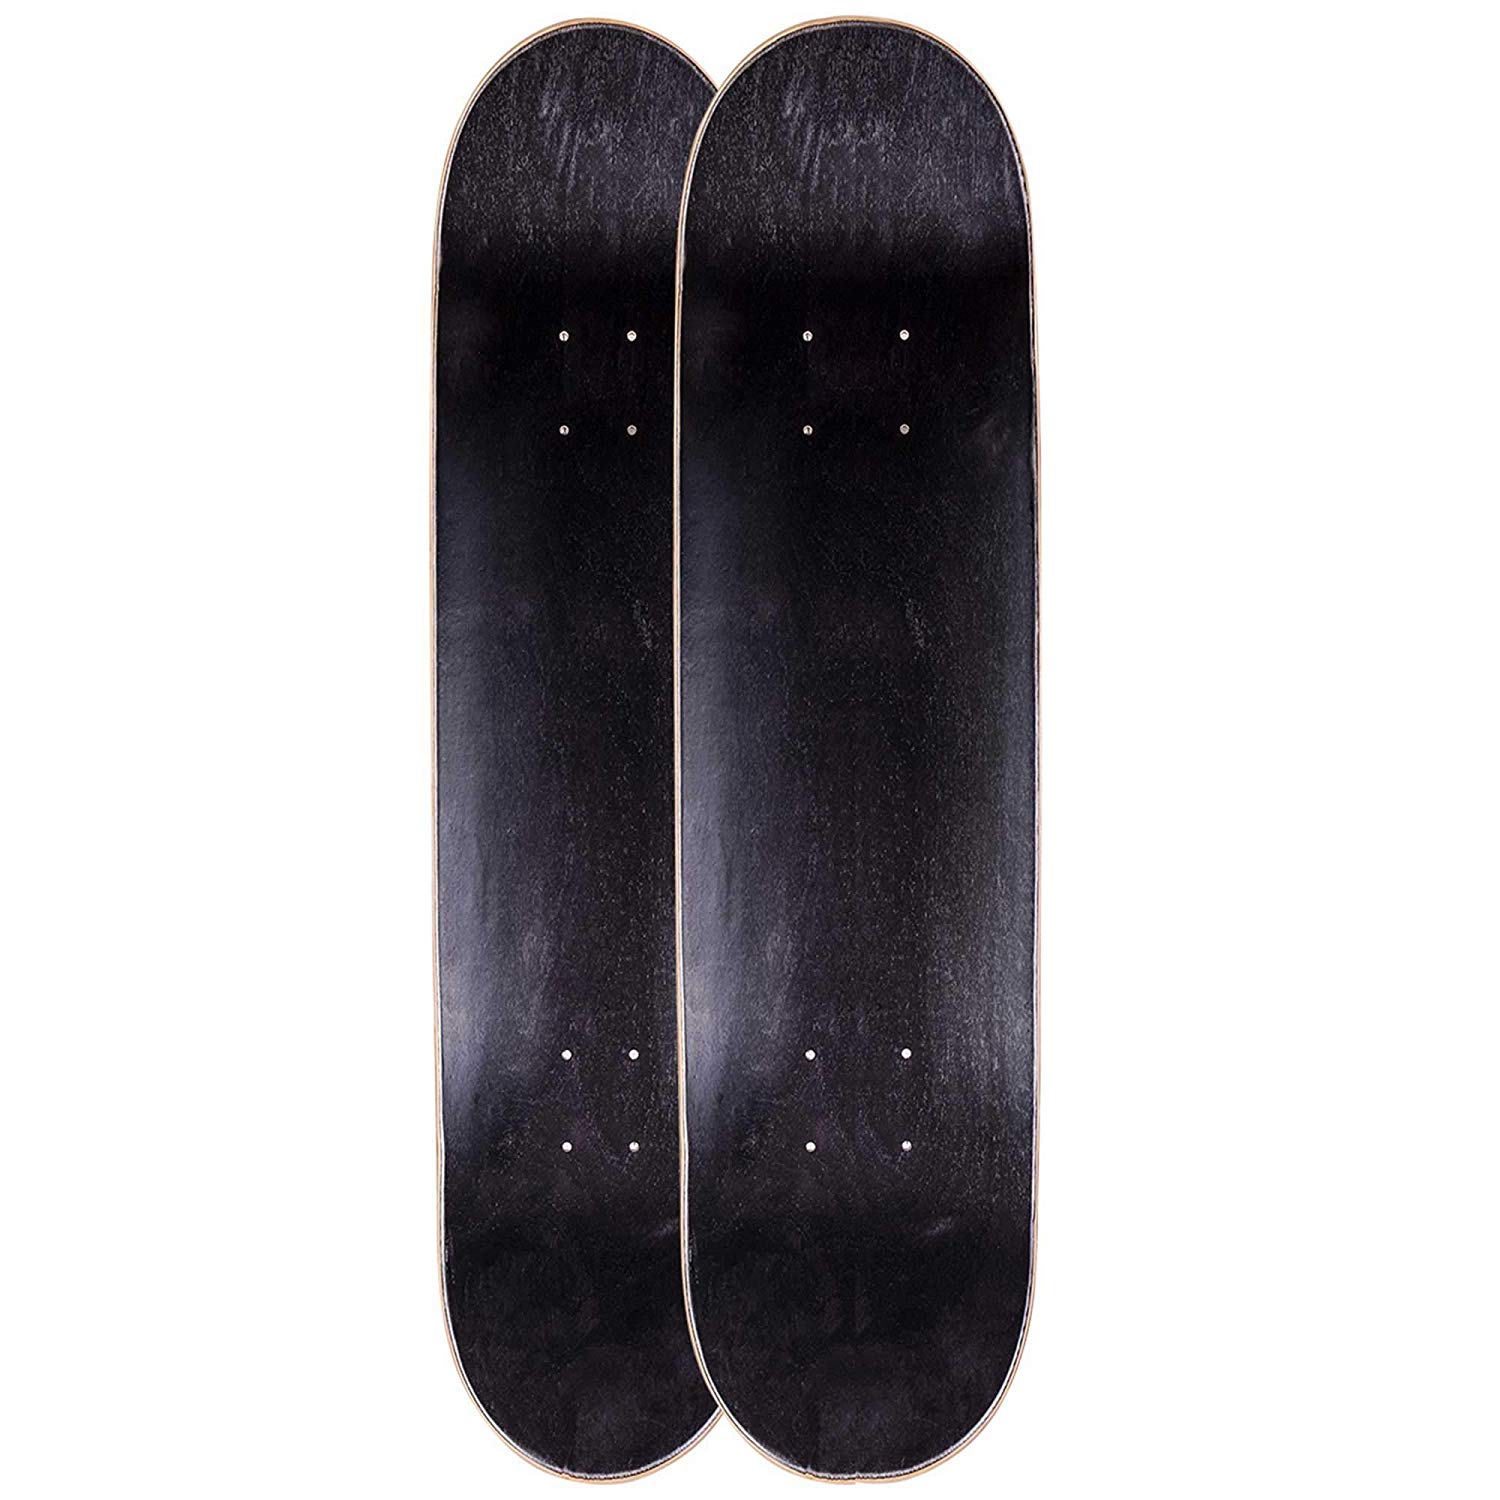 8.0 Two Pack Combinations 8.25 and 8.5 Inch 7.75 Cal 7 Blank Maple Skateboard Decks